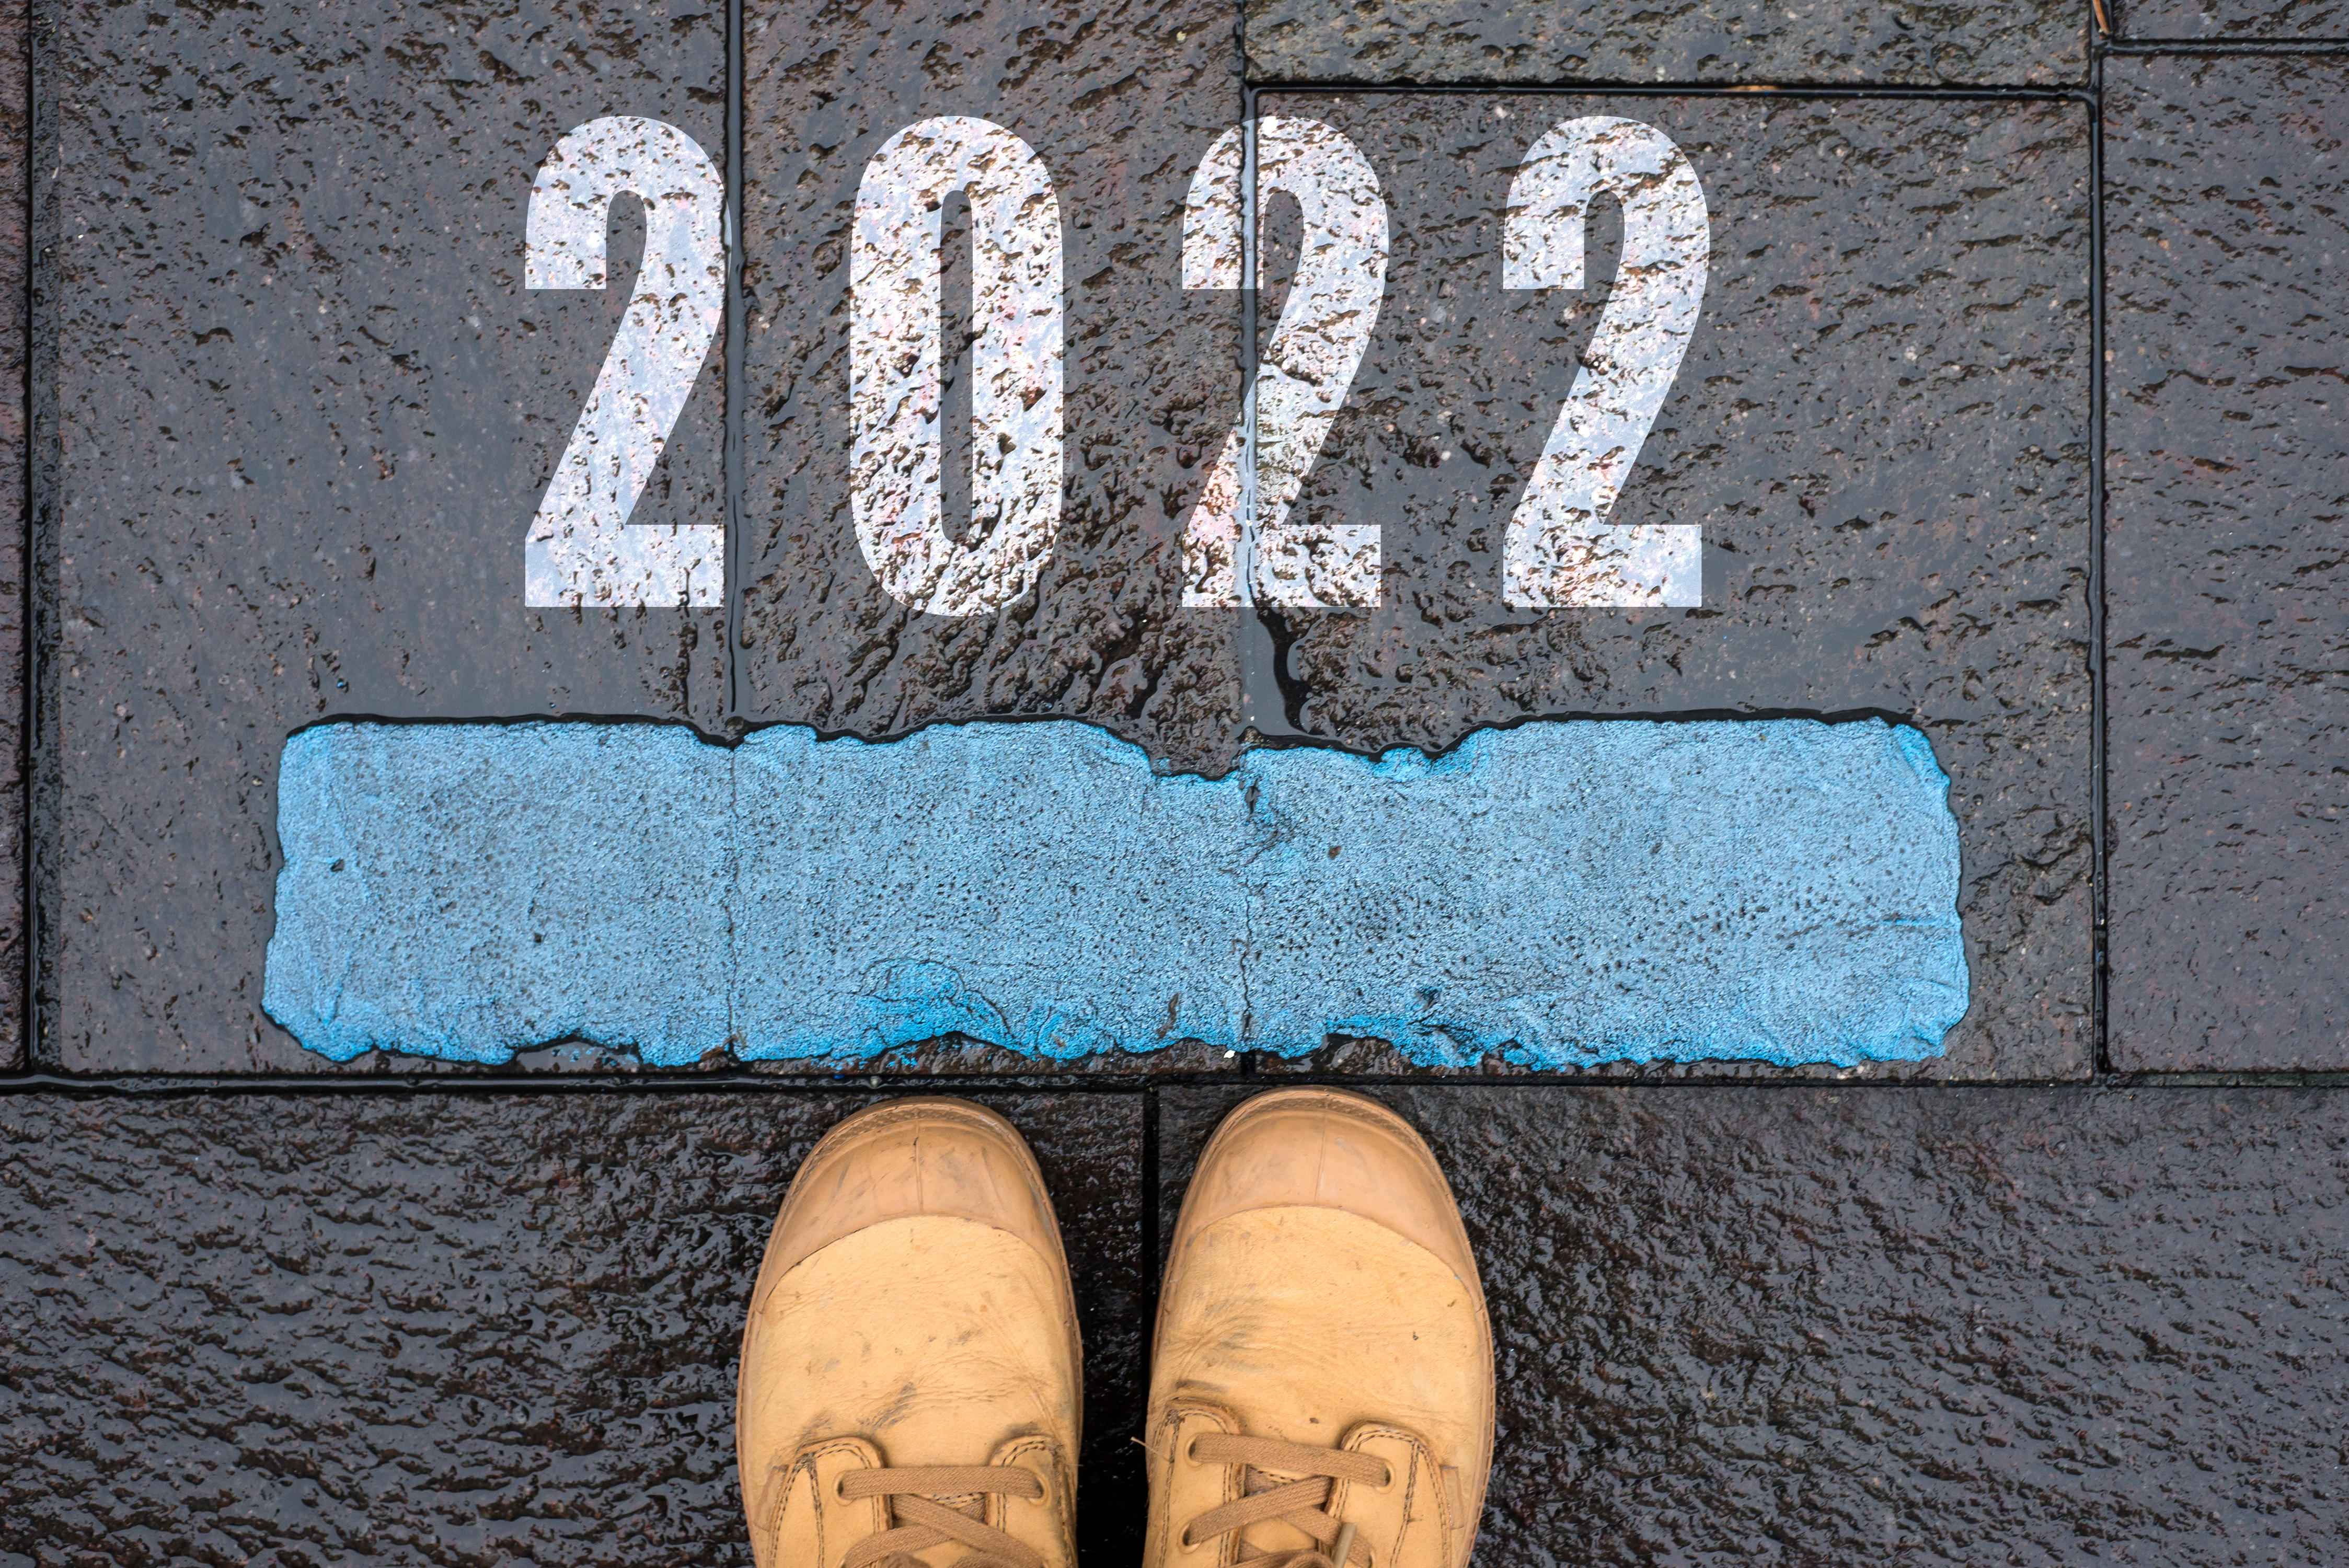 “2022” painted on the ground in front of a starting line with a pair of shoes behind the line.